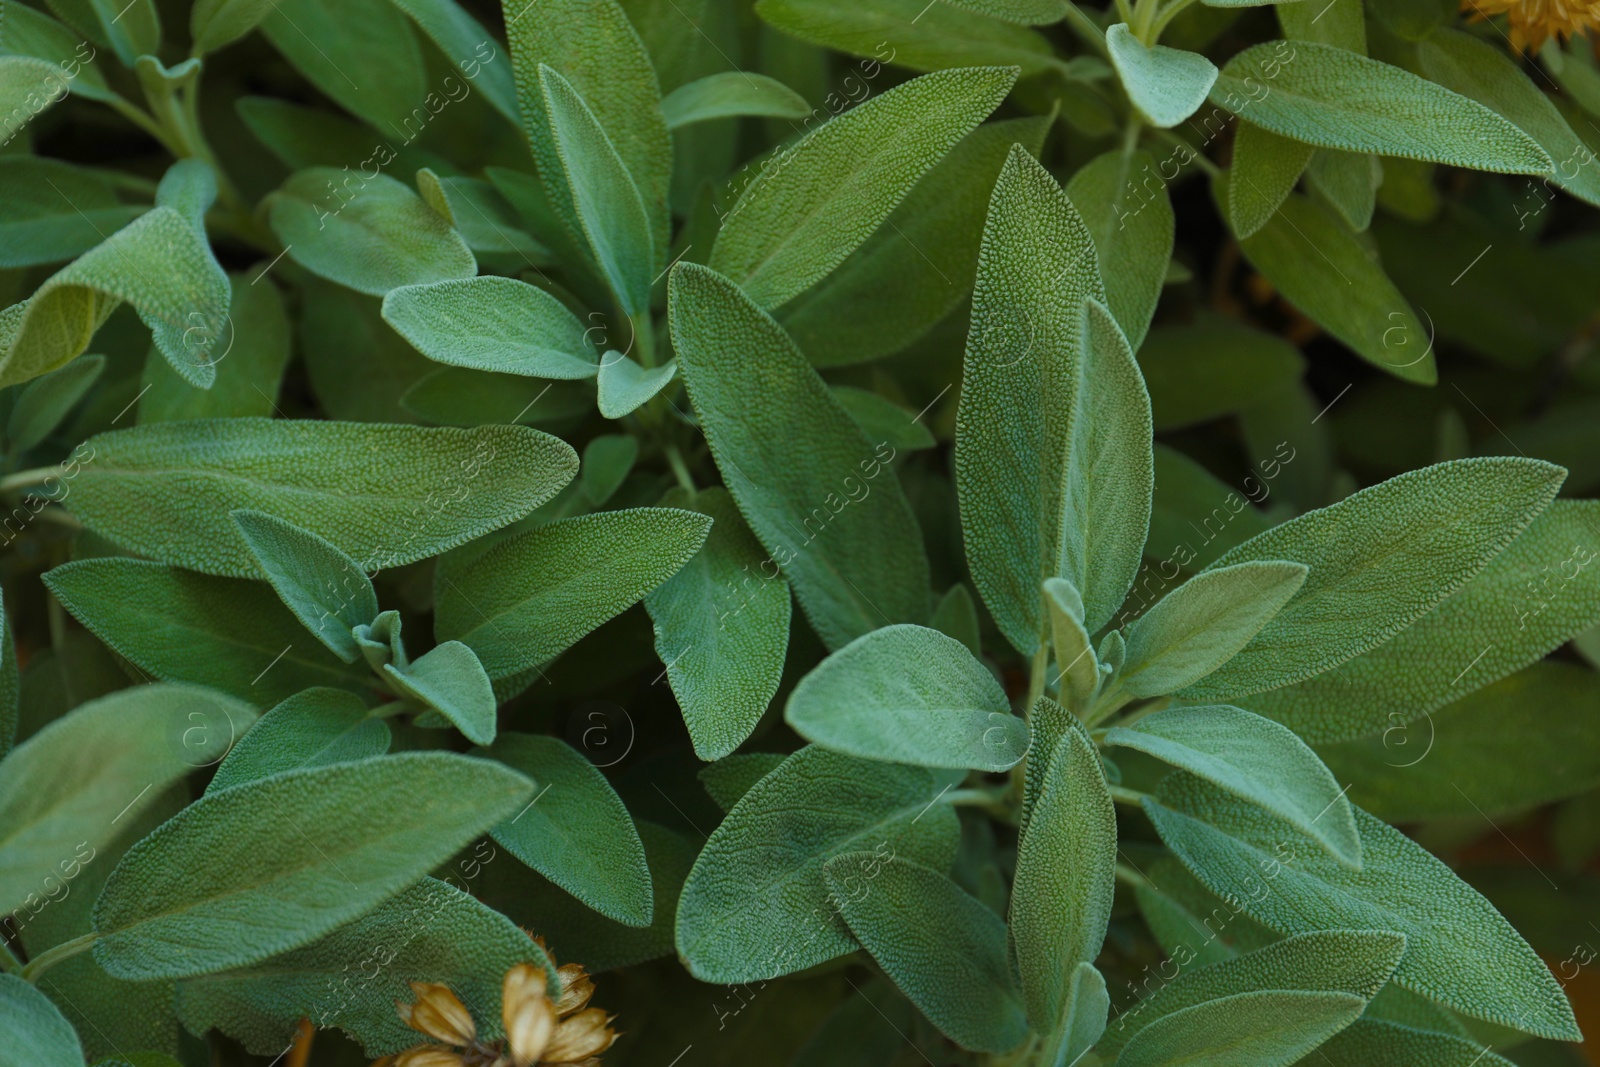 Photo of Beautiful sage with green leaves growing outdoors, closeup